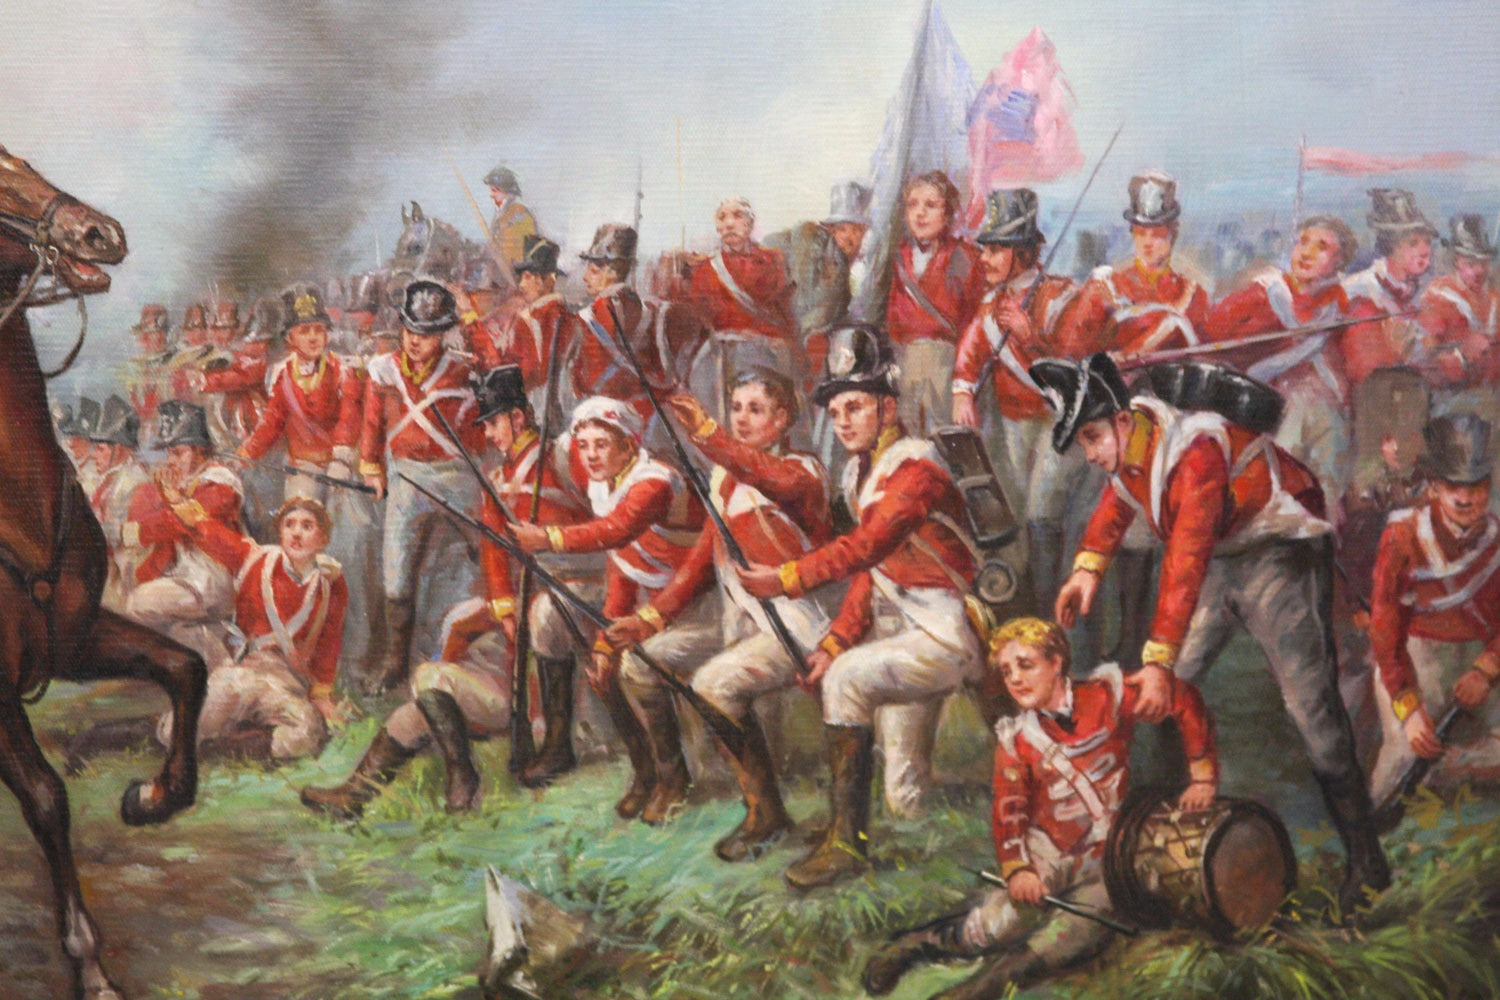 Oil Painting after 'Wellington at Waterloo' in style of Robert Alexander Hillingford